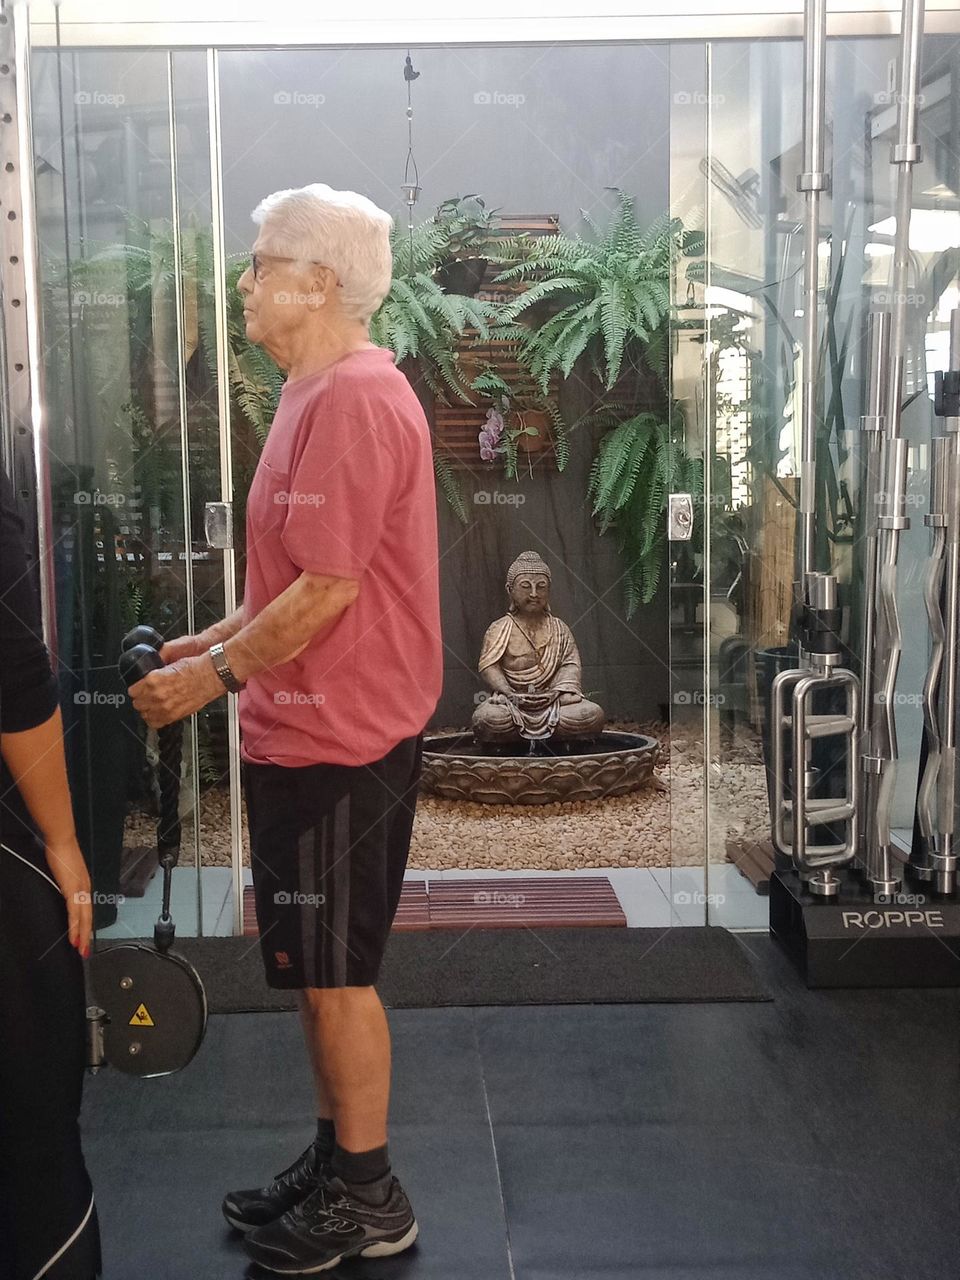 Elderly man at the gym, standing up working arms, gym with plants and a statue